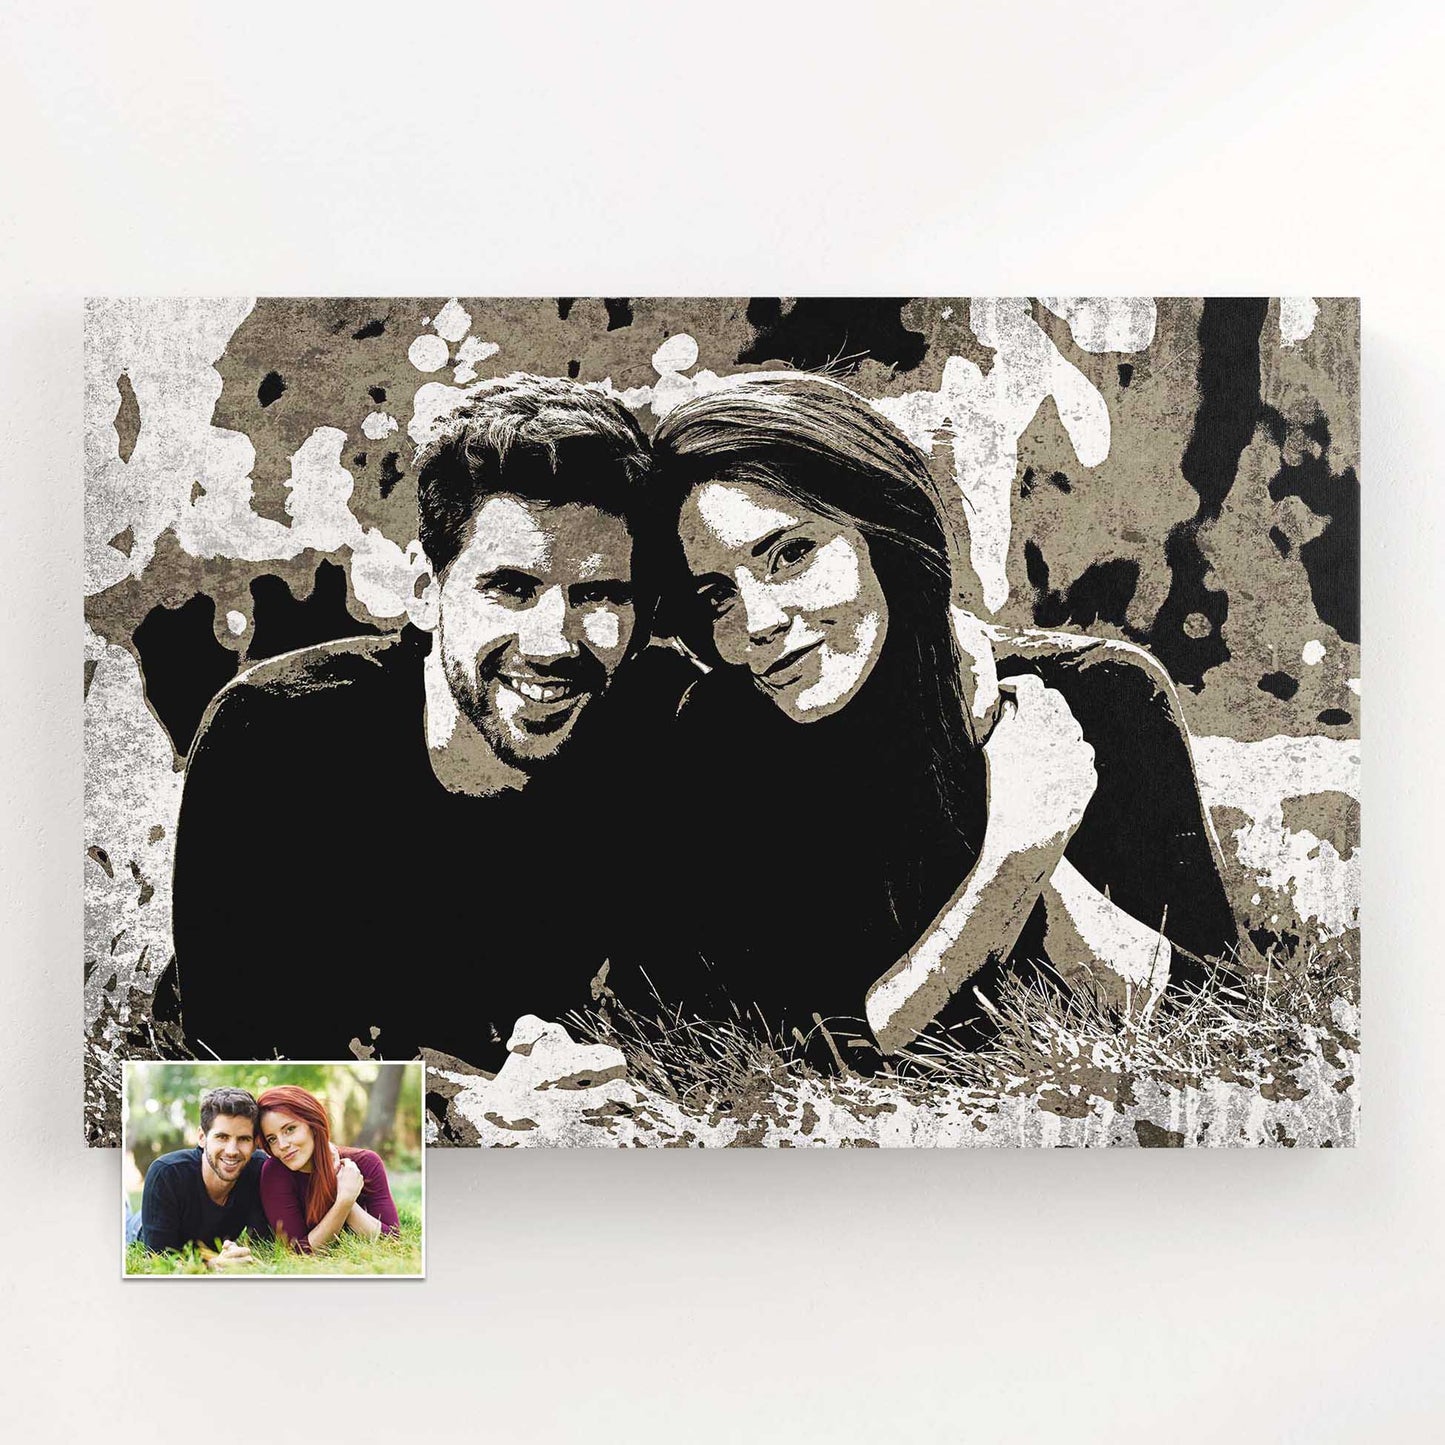 Make a statement with our Personalised Black & White Urban Street Art Canvas. This collection of sleek and clean designs is created by painting from your photo, resulting in a unique and personalized piece of art. It's the perfect gift